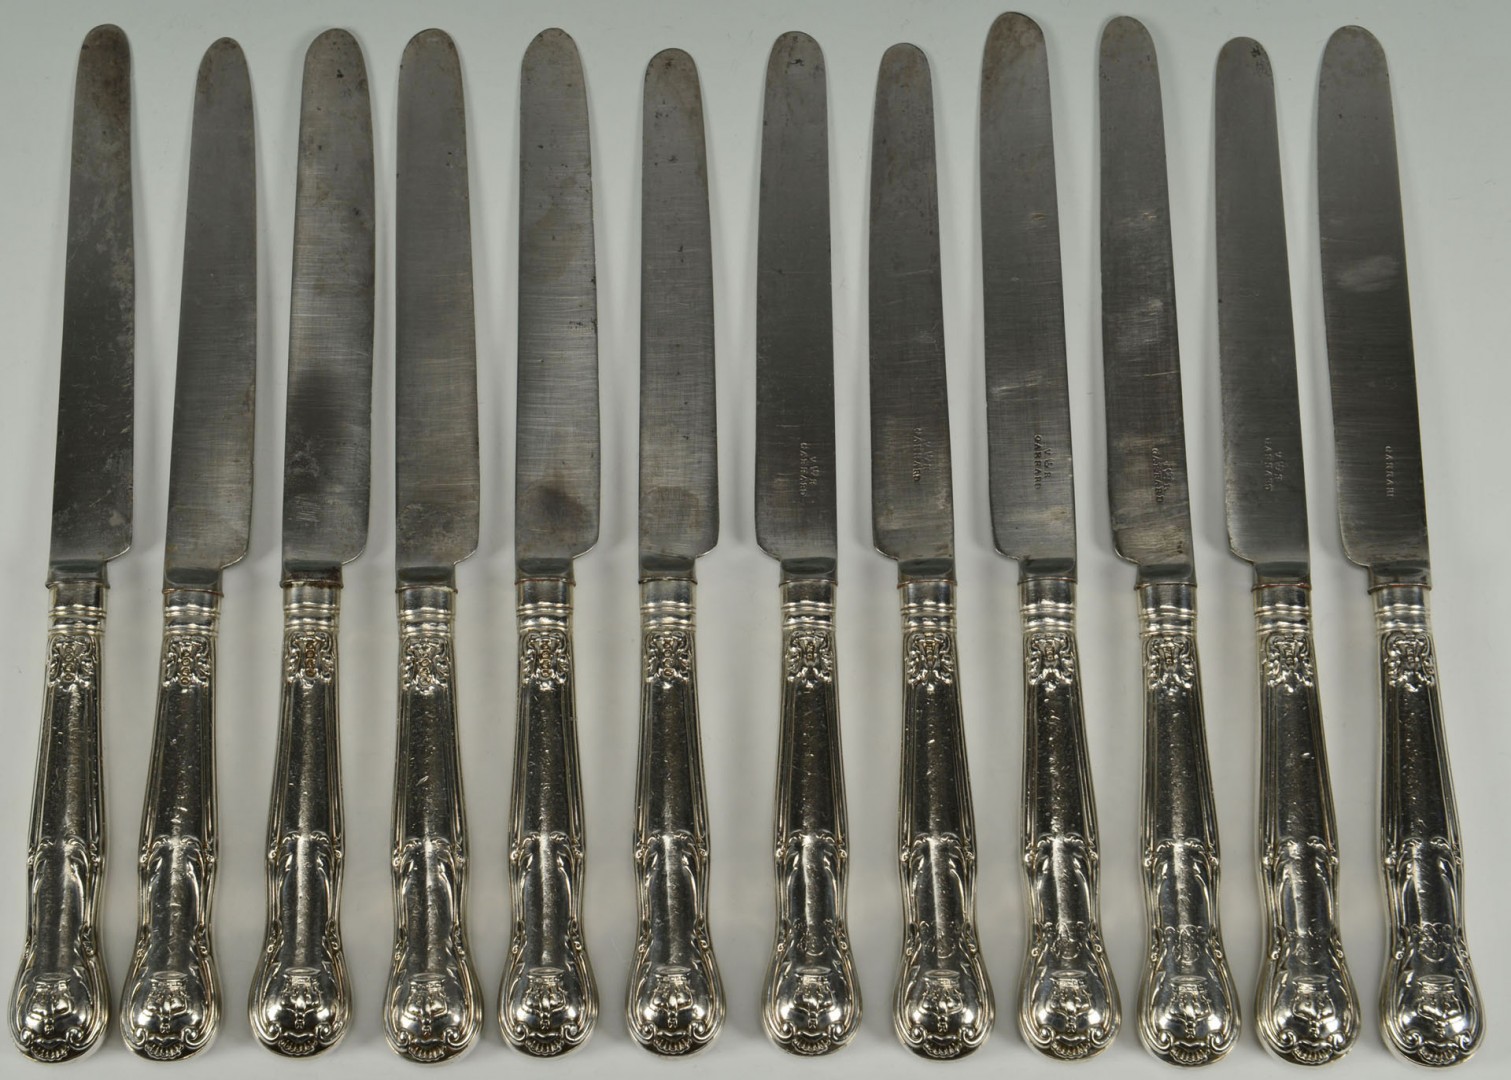 Lot 94: 12 sterling knives by Mary Chawner for Queen Adela